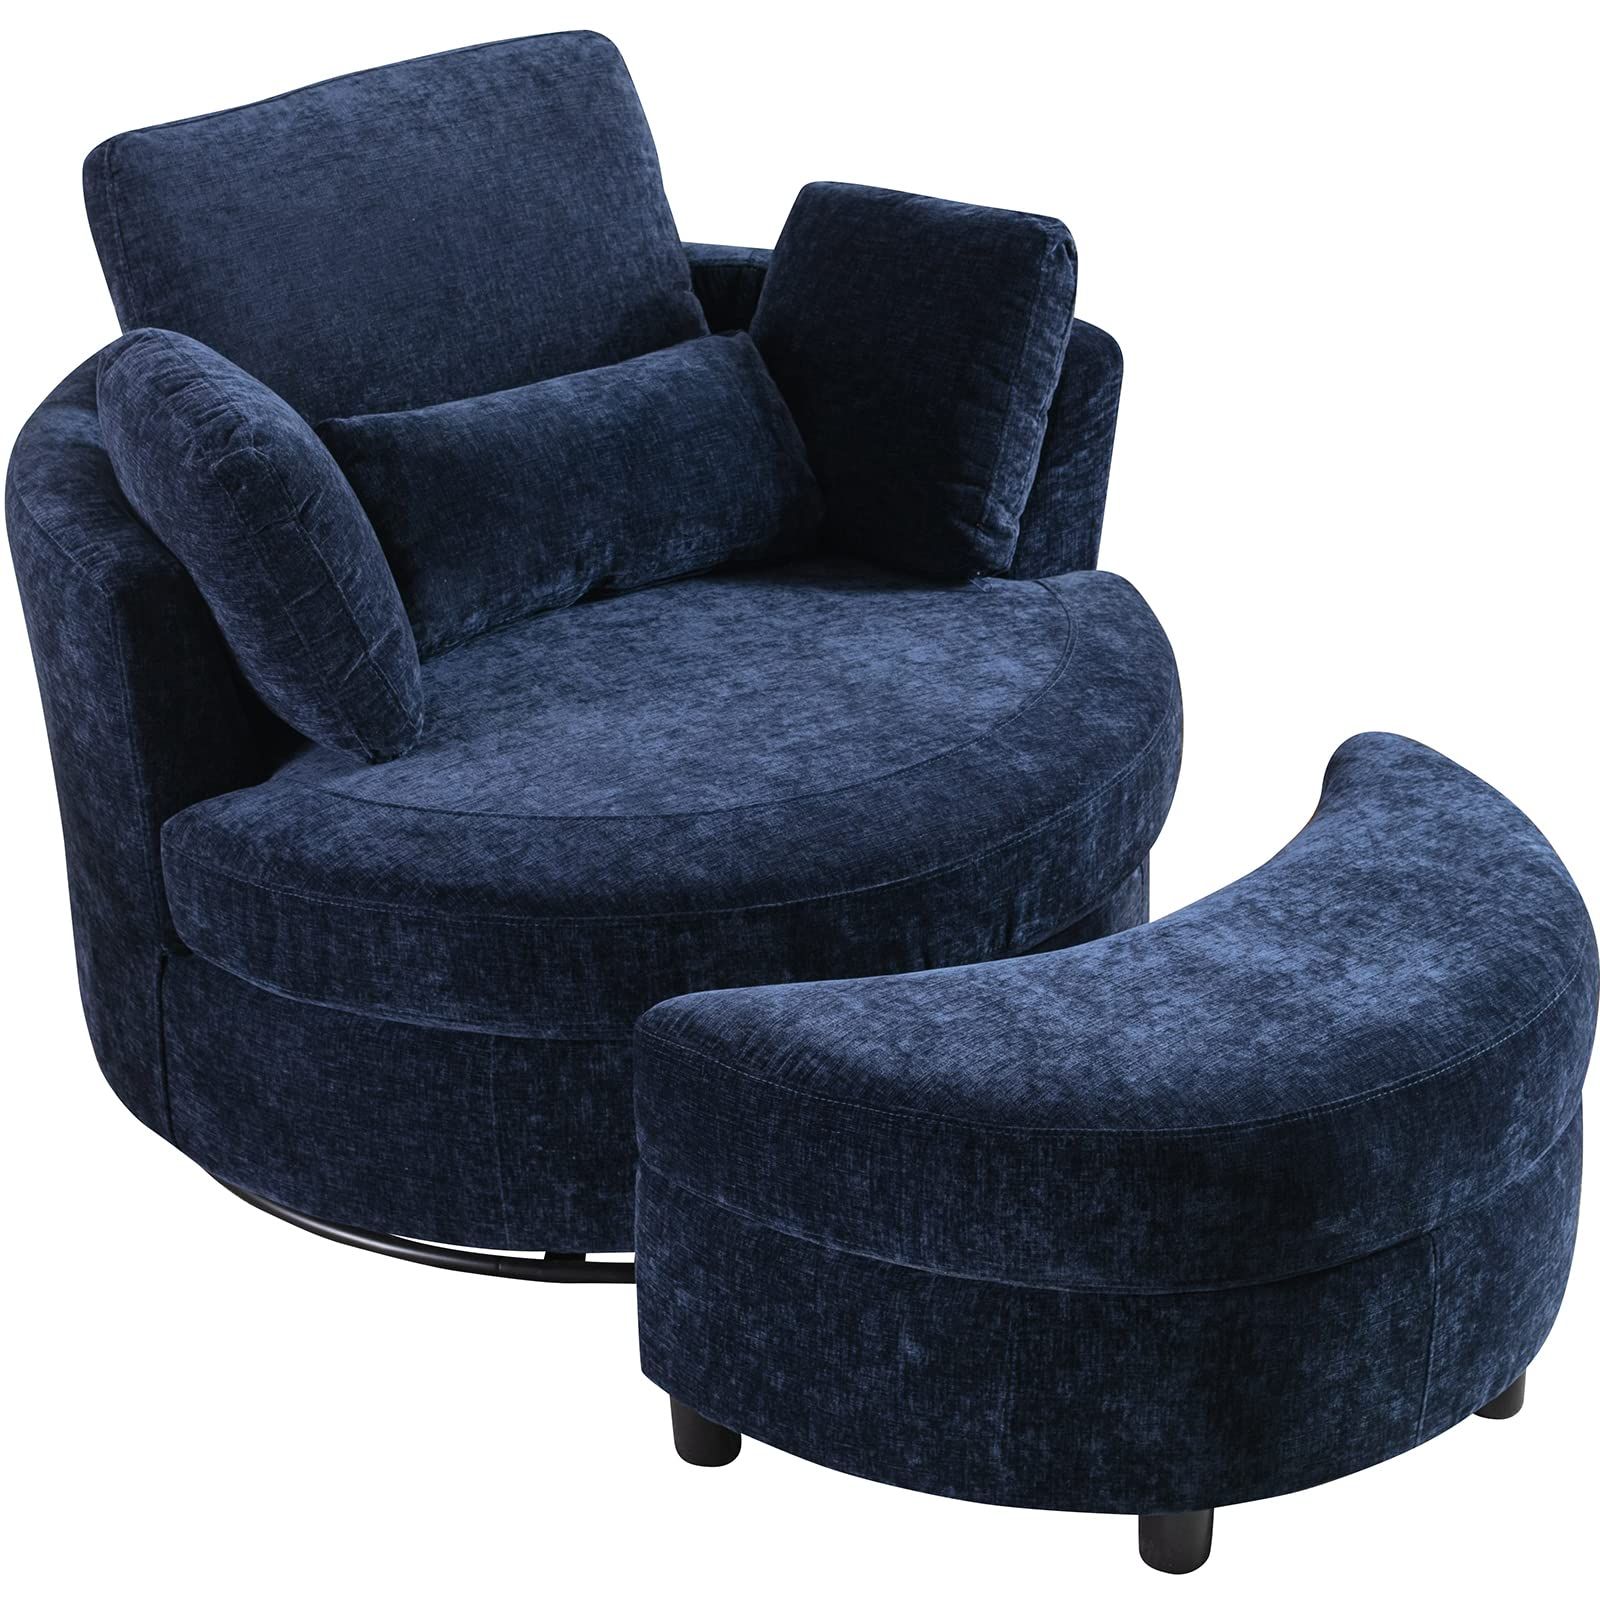 Luxurious Cuddle Chair and Ottoman Set: The Ultimate Comfort Experience